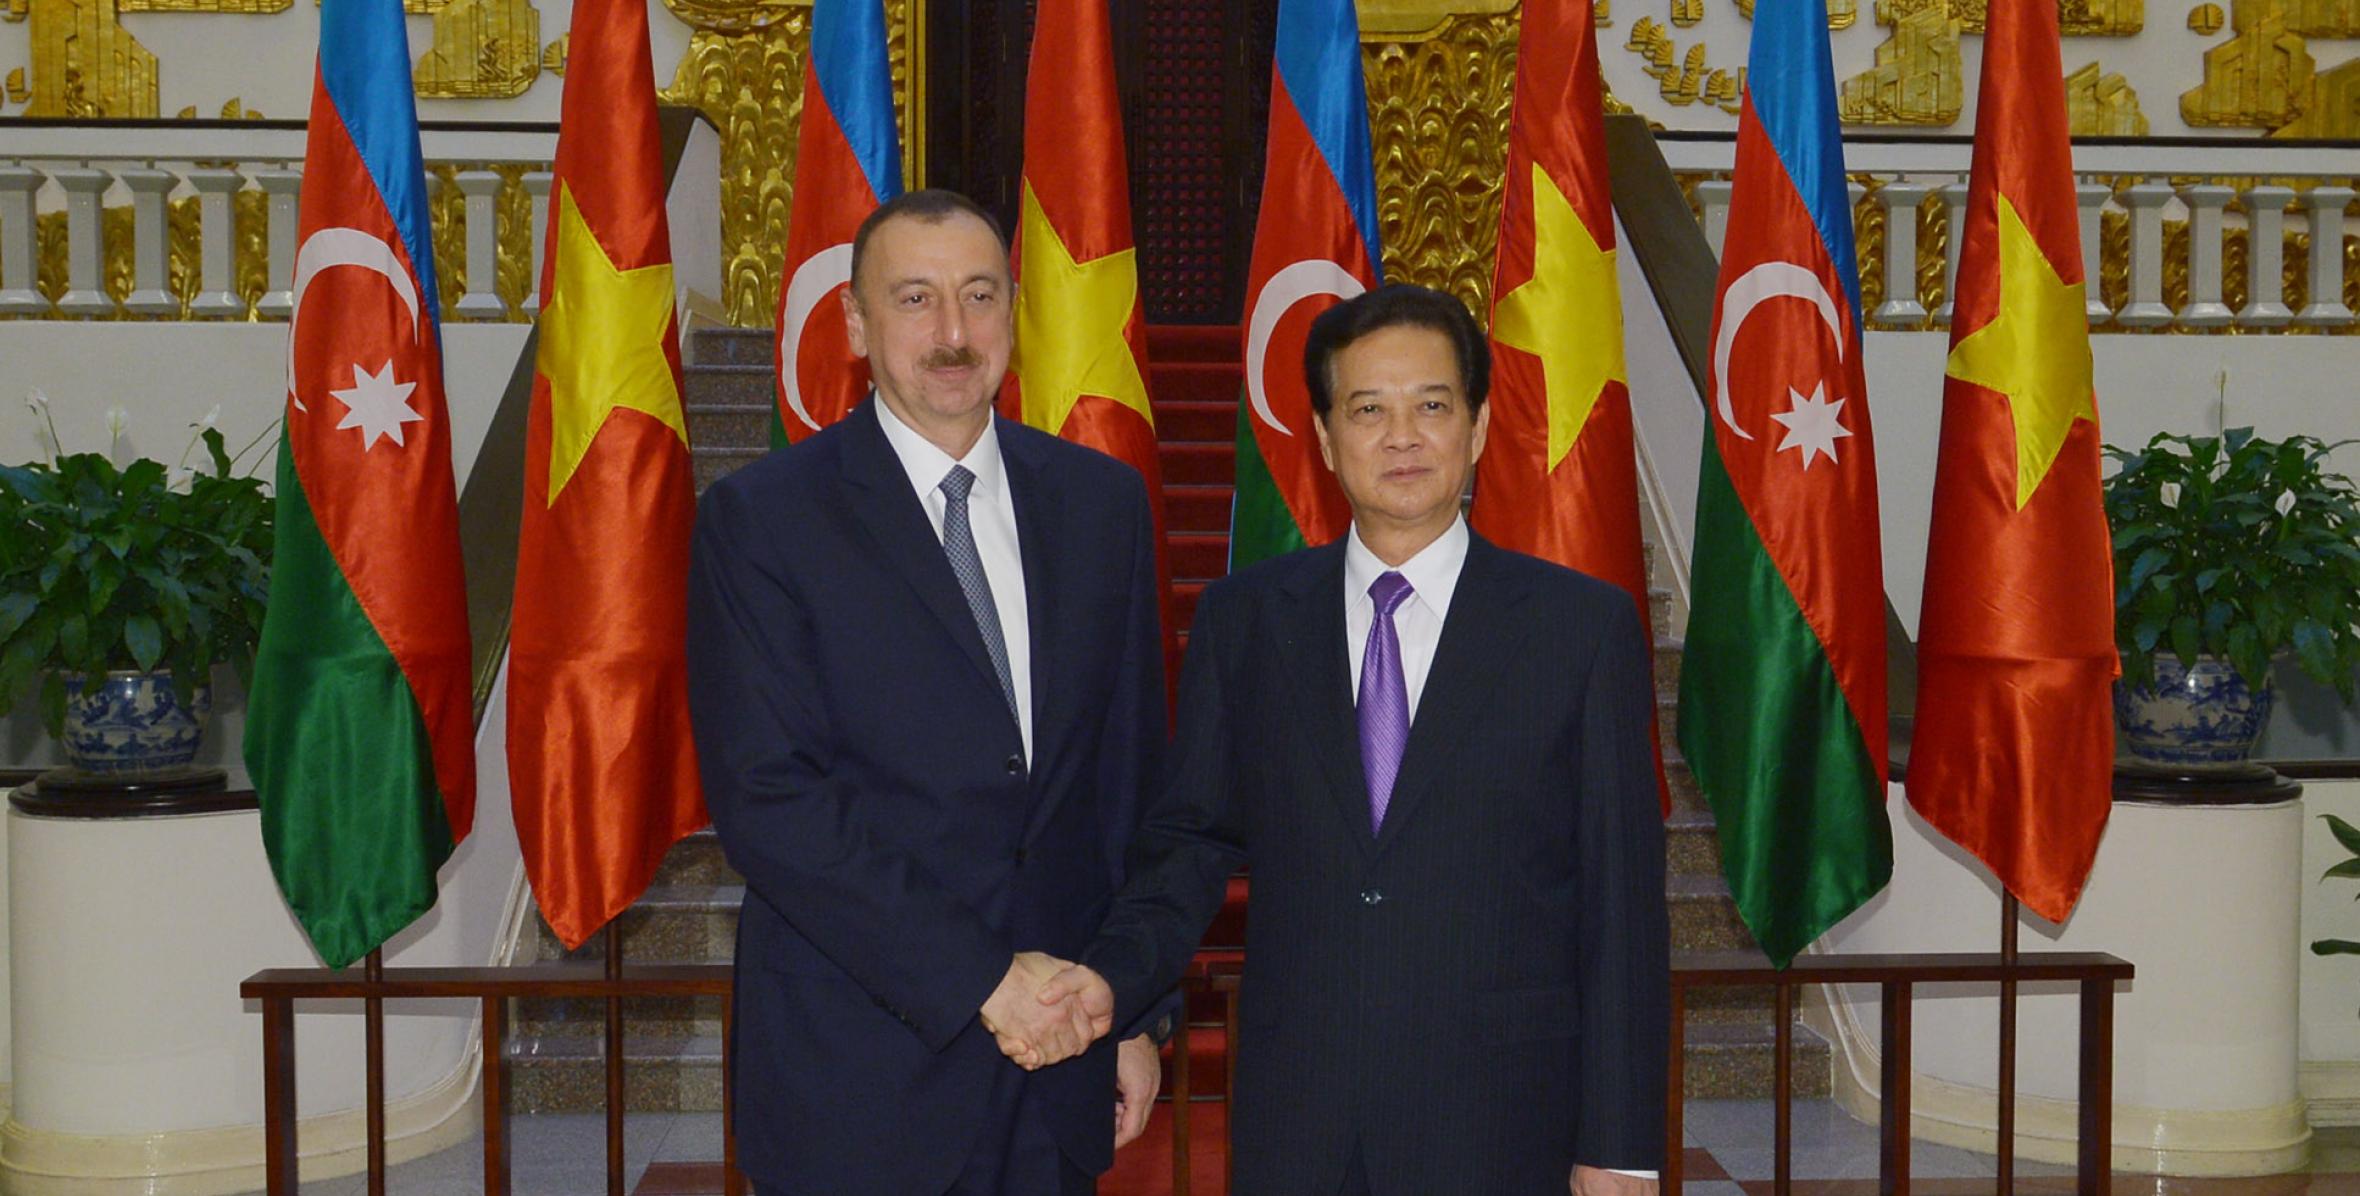 Ilham Aliyev met with the Prime Minister of Vietnam